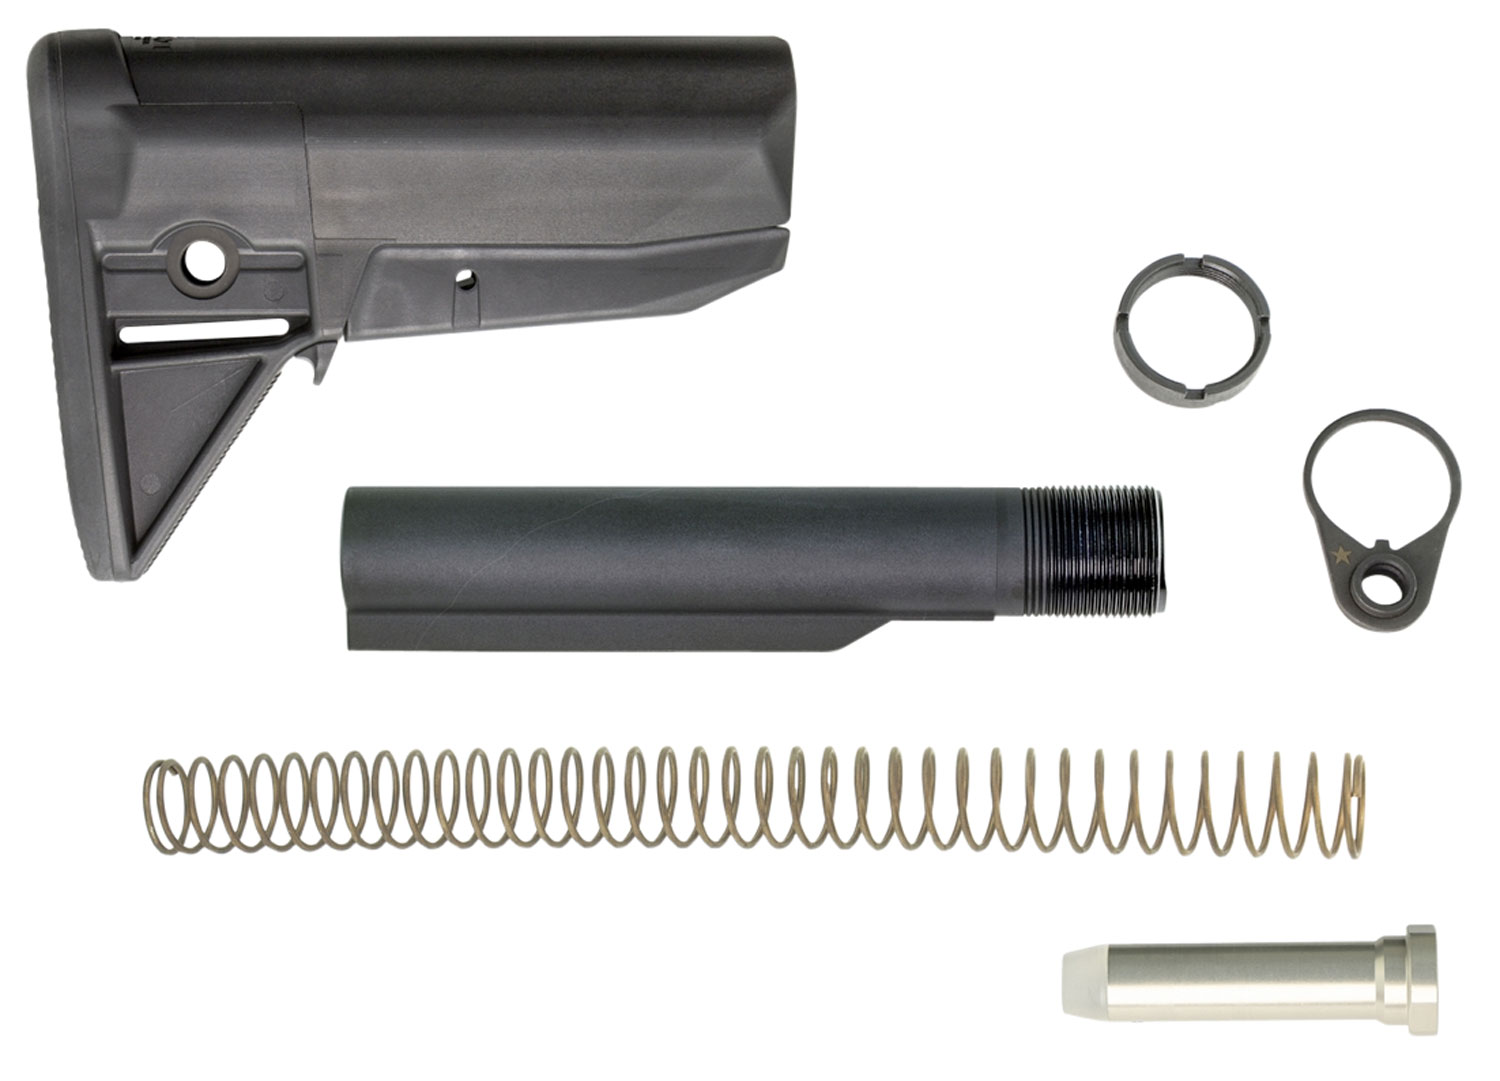 BCM GFSKMOD0BLK BCMGunfighter Stock Kit Black Synthetic for AR-15 Includes Stock Tube